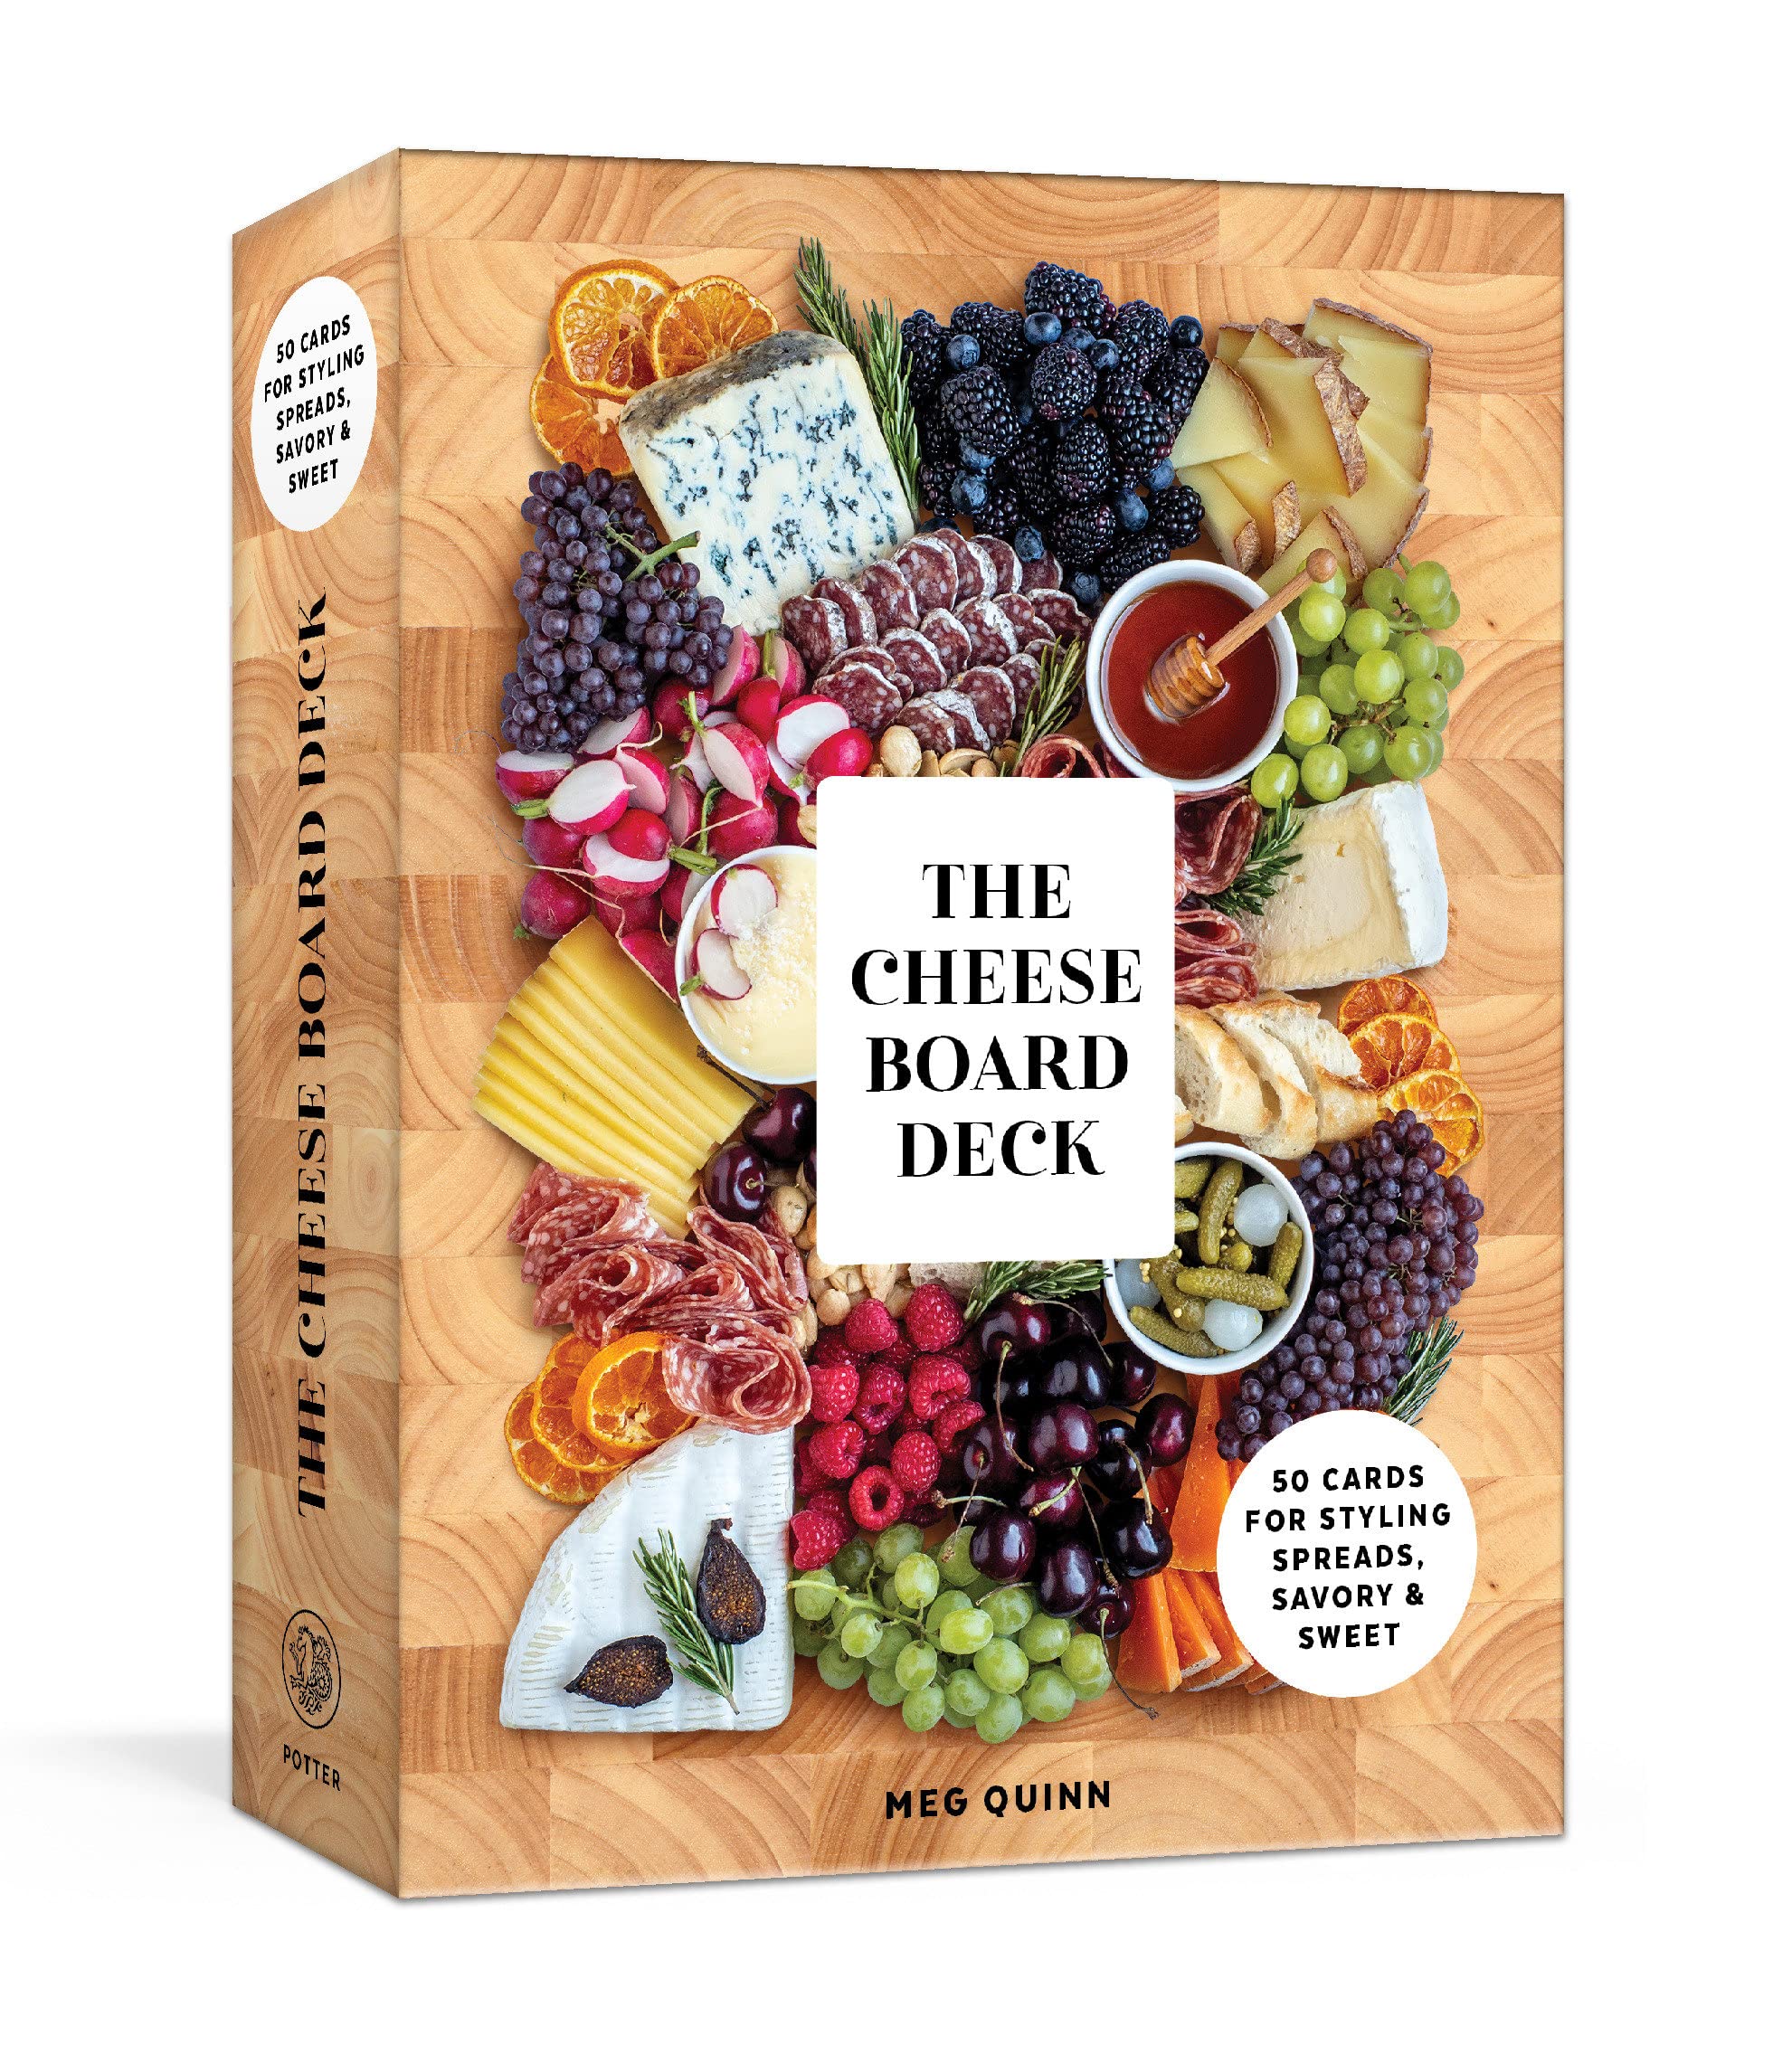 The Cheese Card Deck: Discover, Pair, & Enjoy